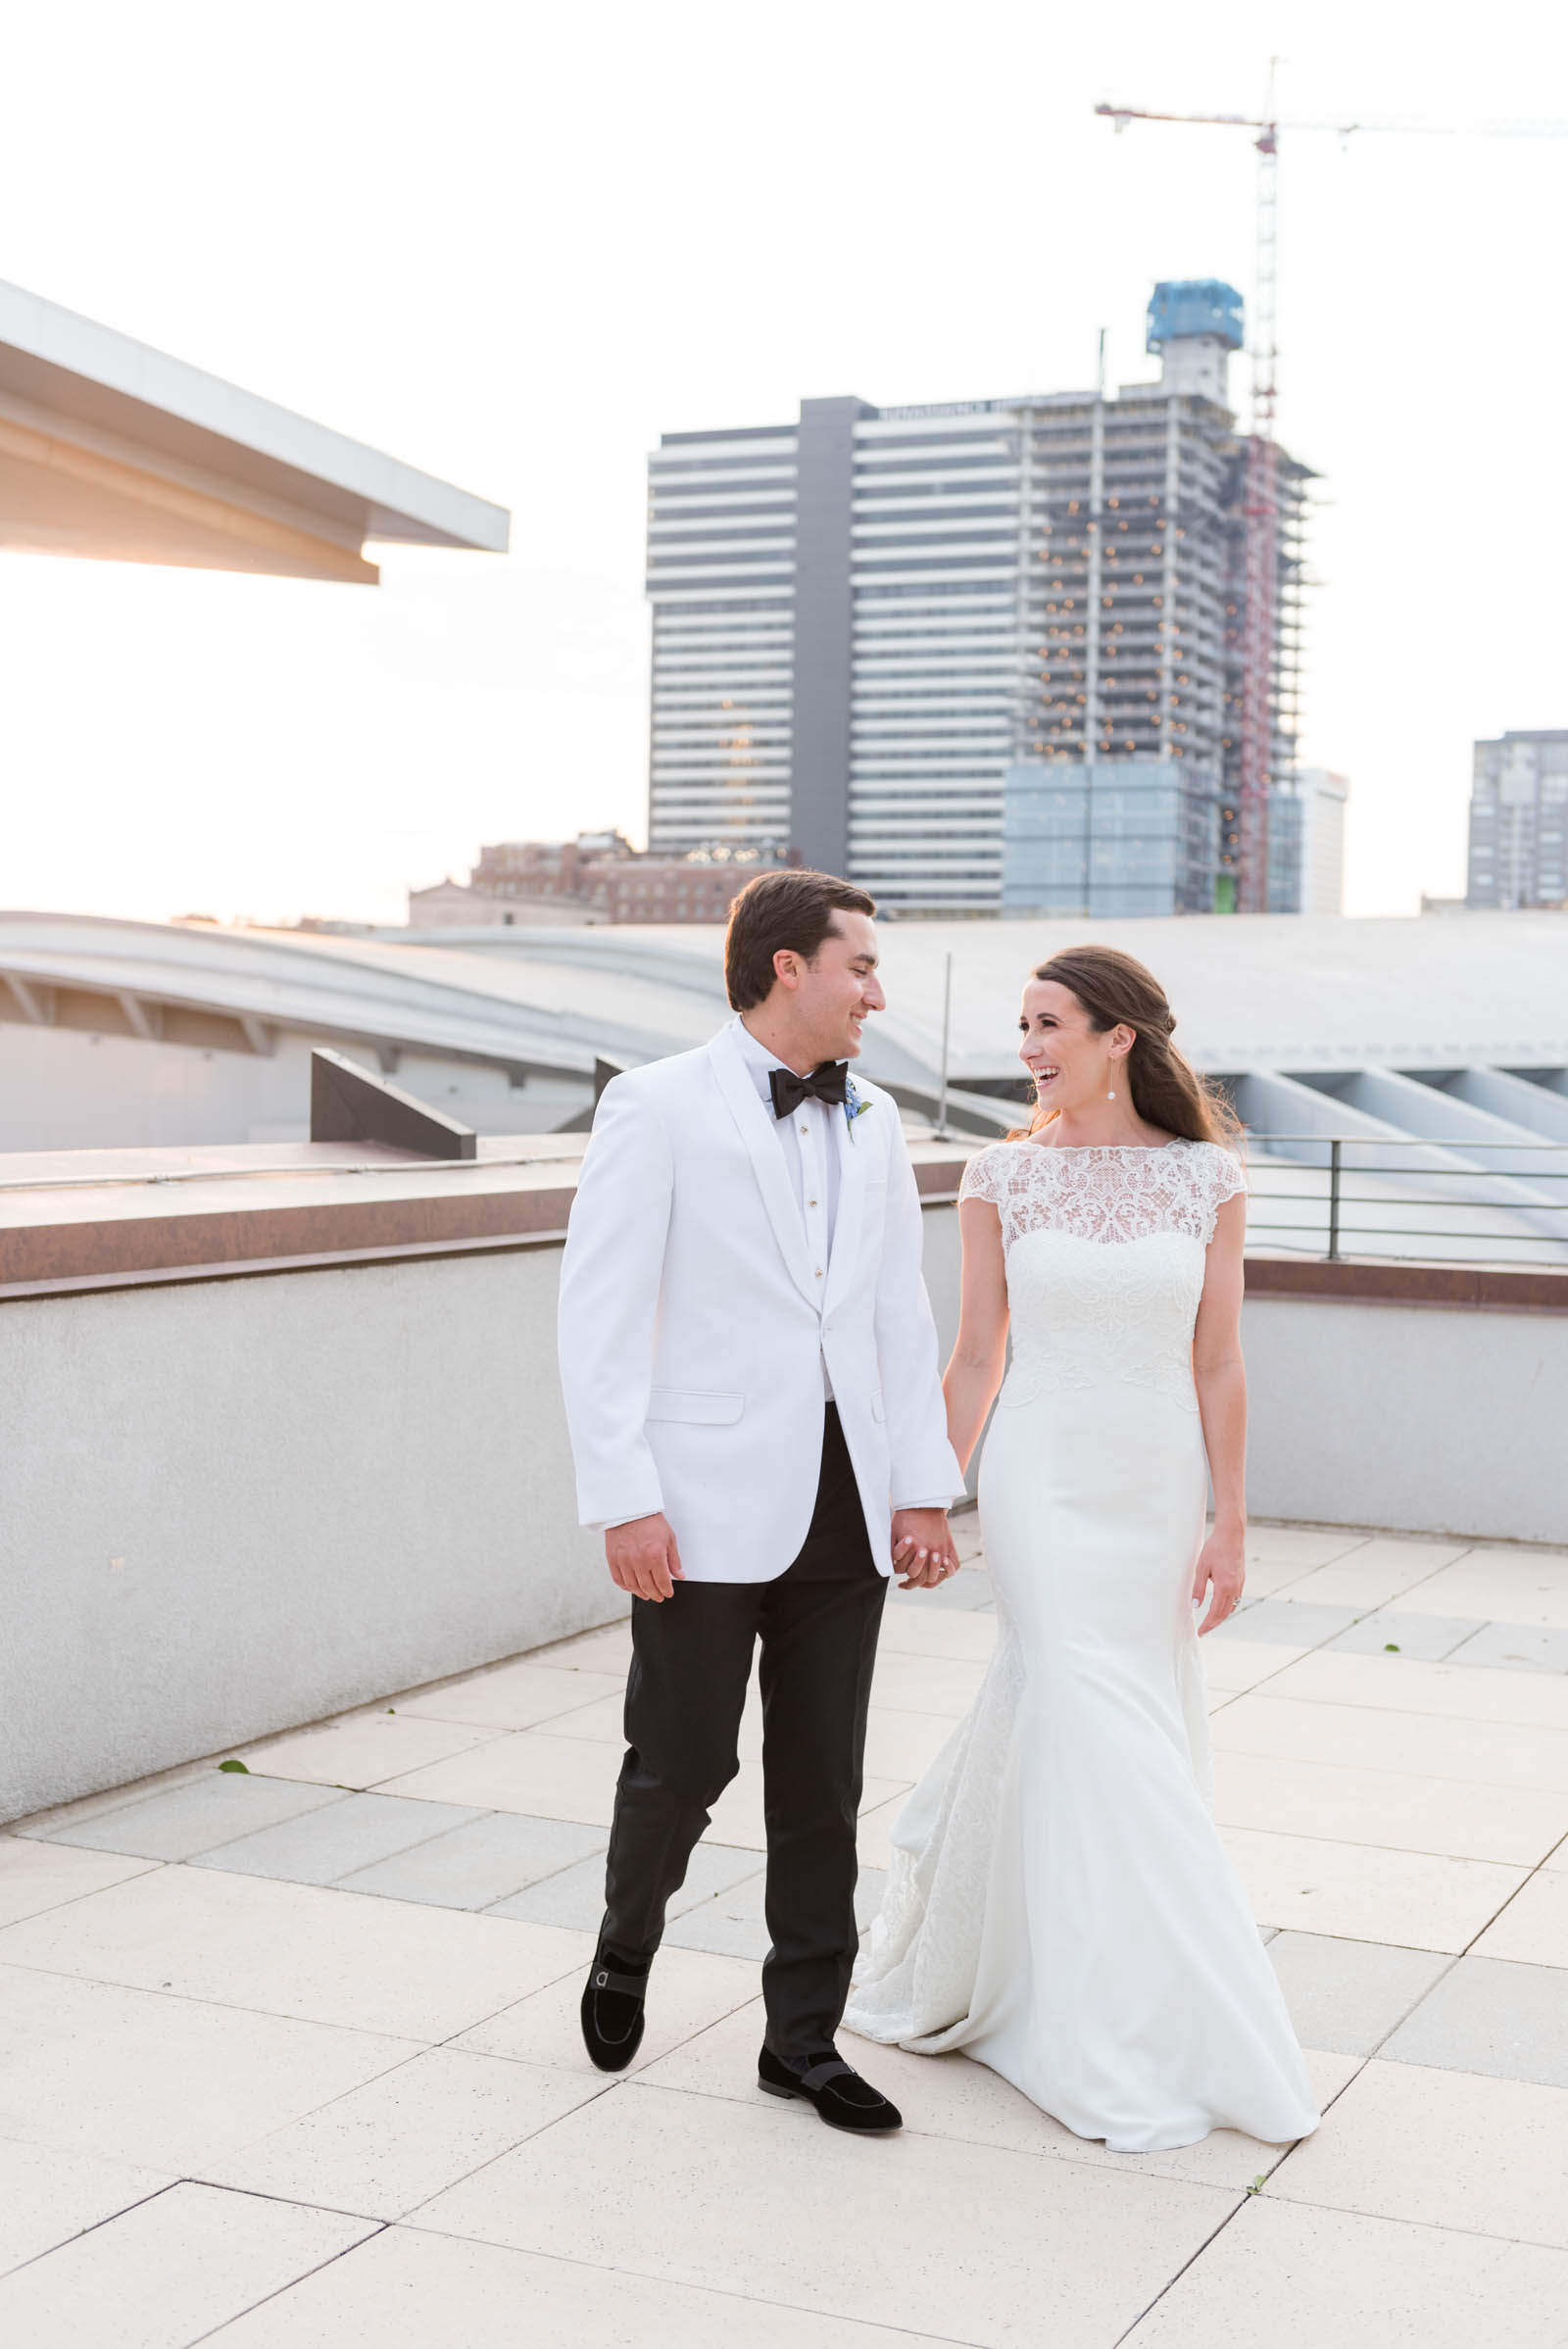 Summer Wedding at the Country Music Hall of Fame, Sweet Williams Photography, Wedding and Portrait Photographer in Nashville Tennessee